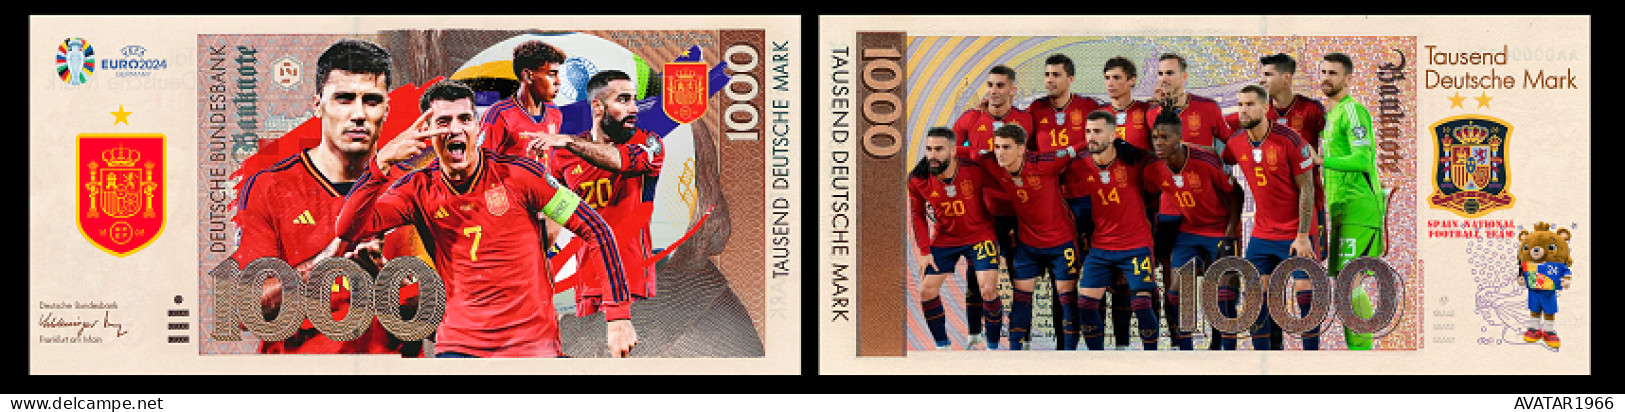 UEFA European Football Championship 2024 qualified country Spain  8 pieces Germany fantasy paper money